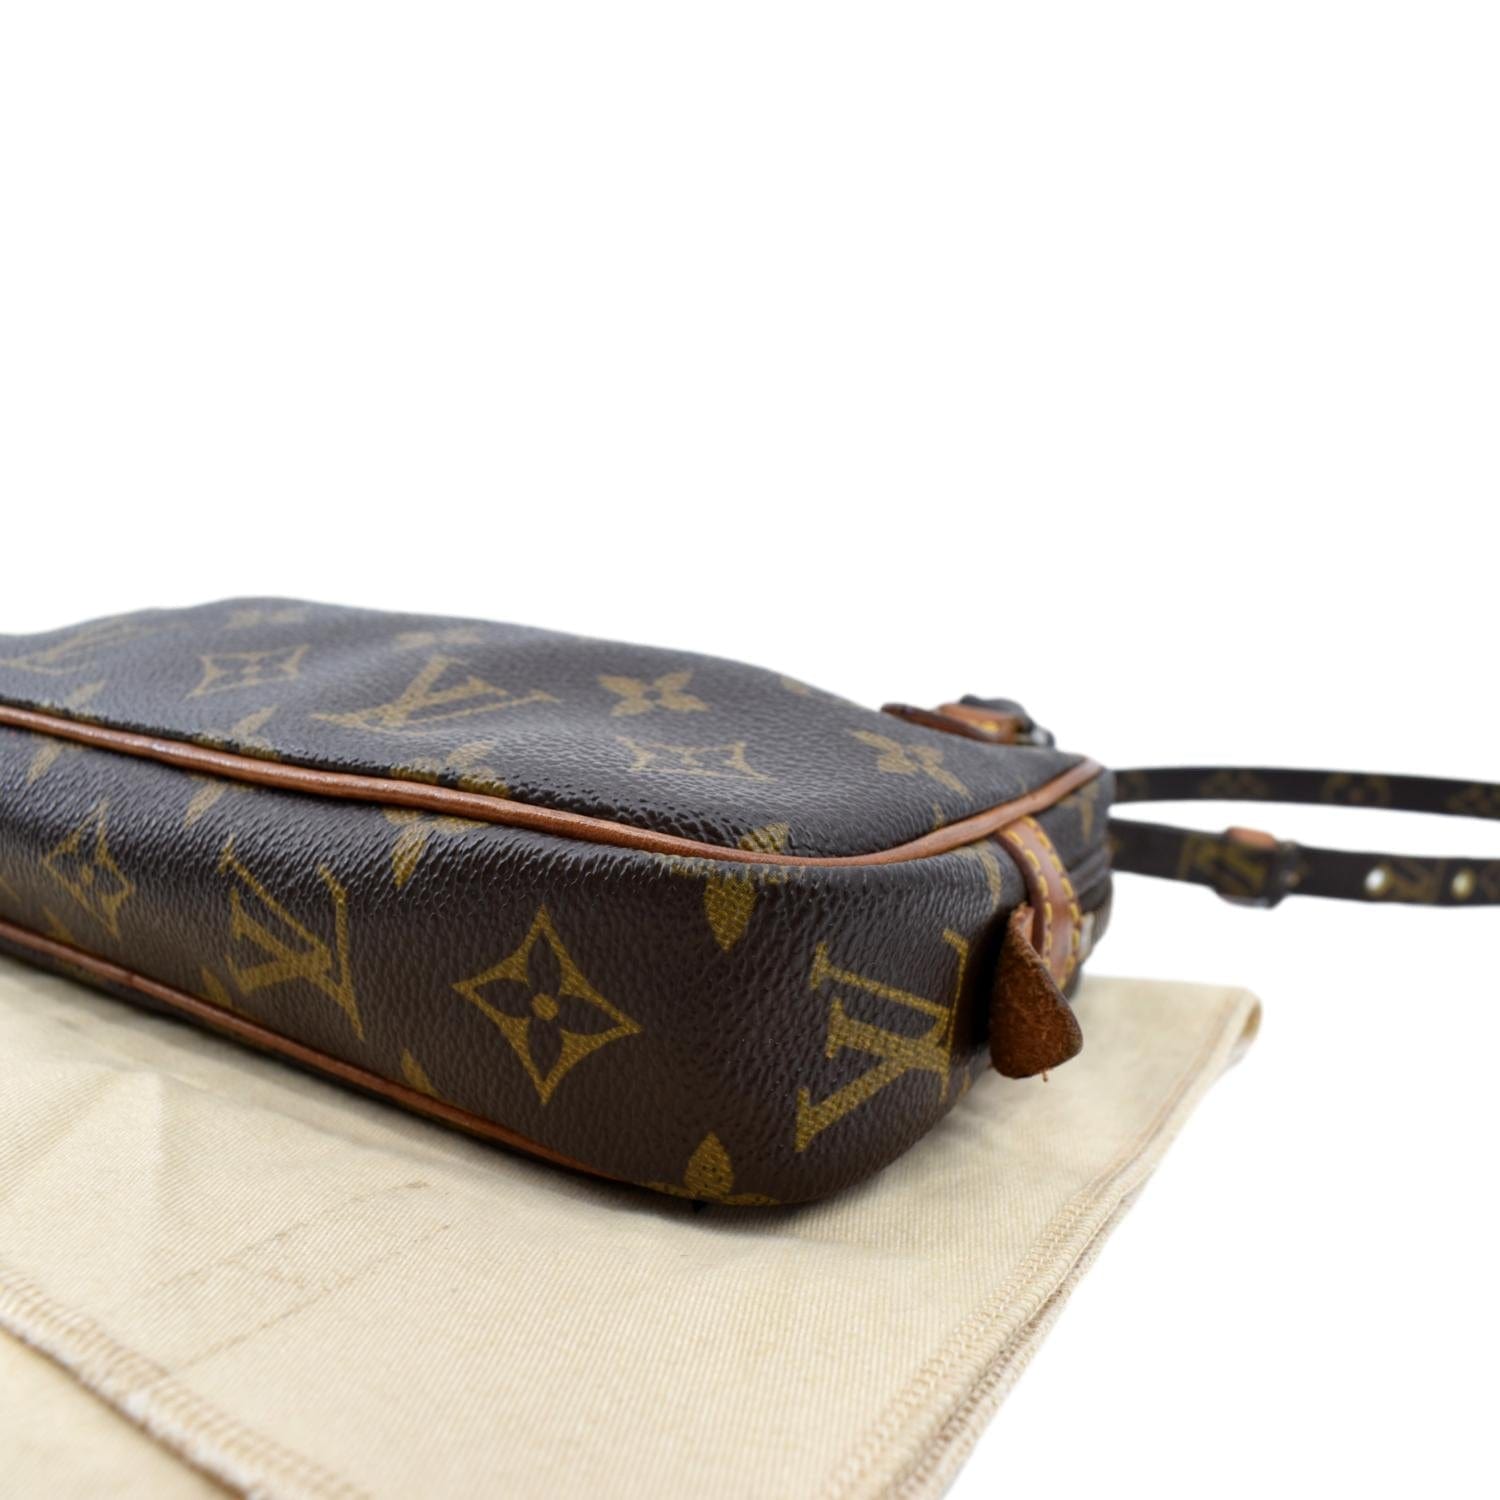 Louis Vuitton Brown Monogram Pochette Marly Bandouliere Leather